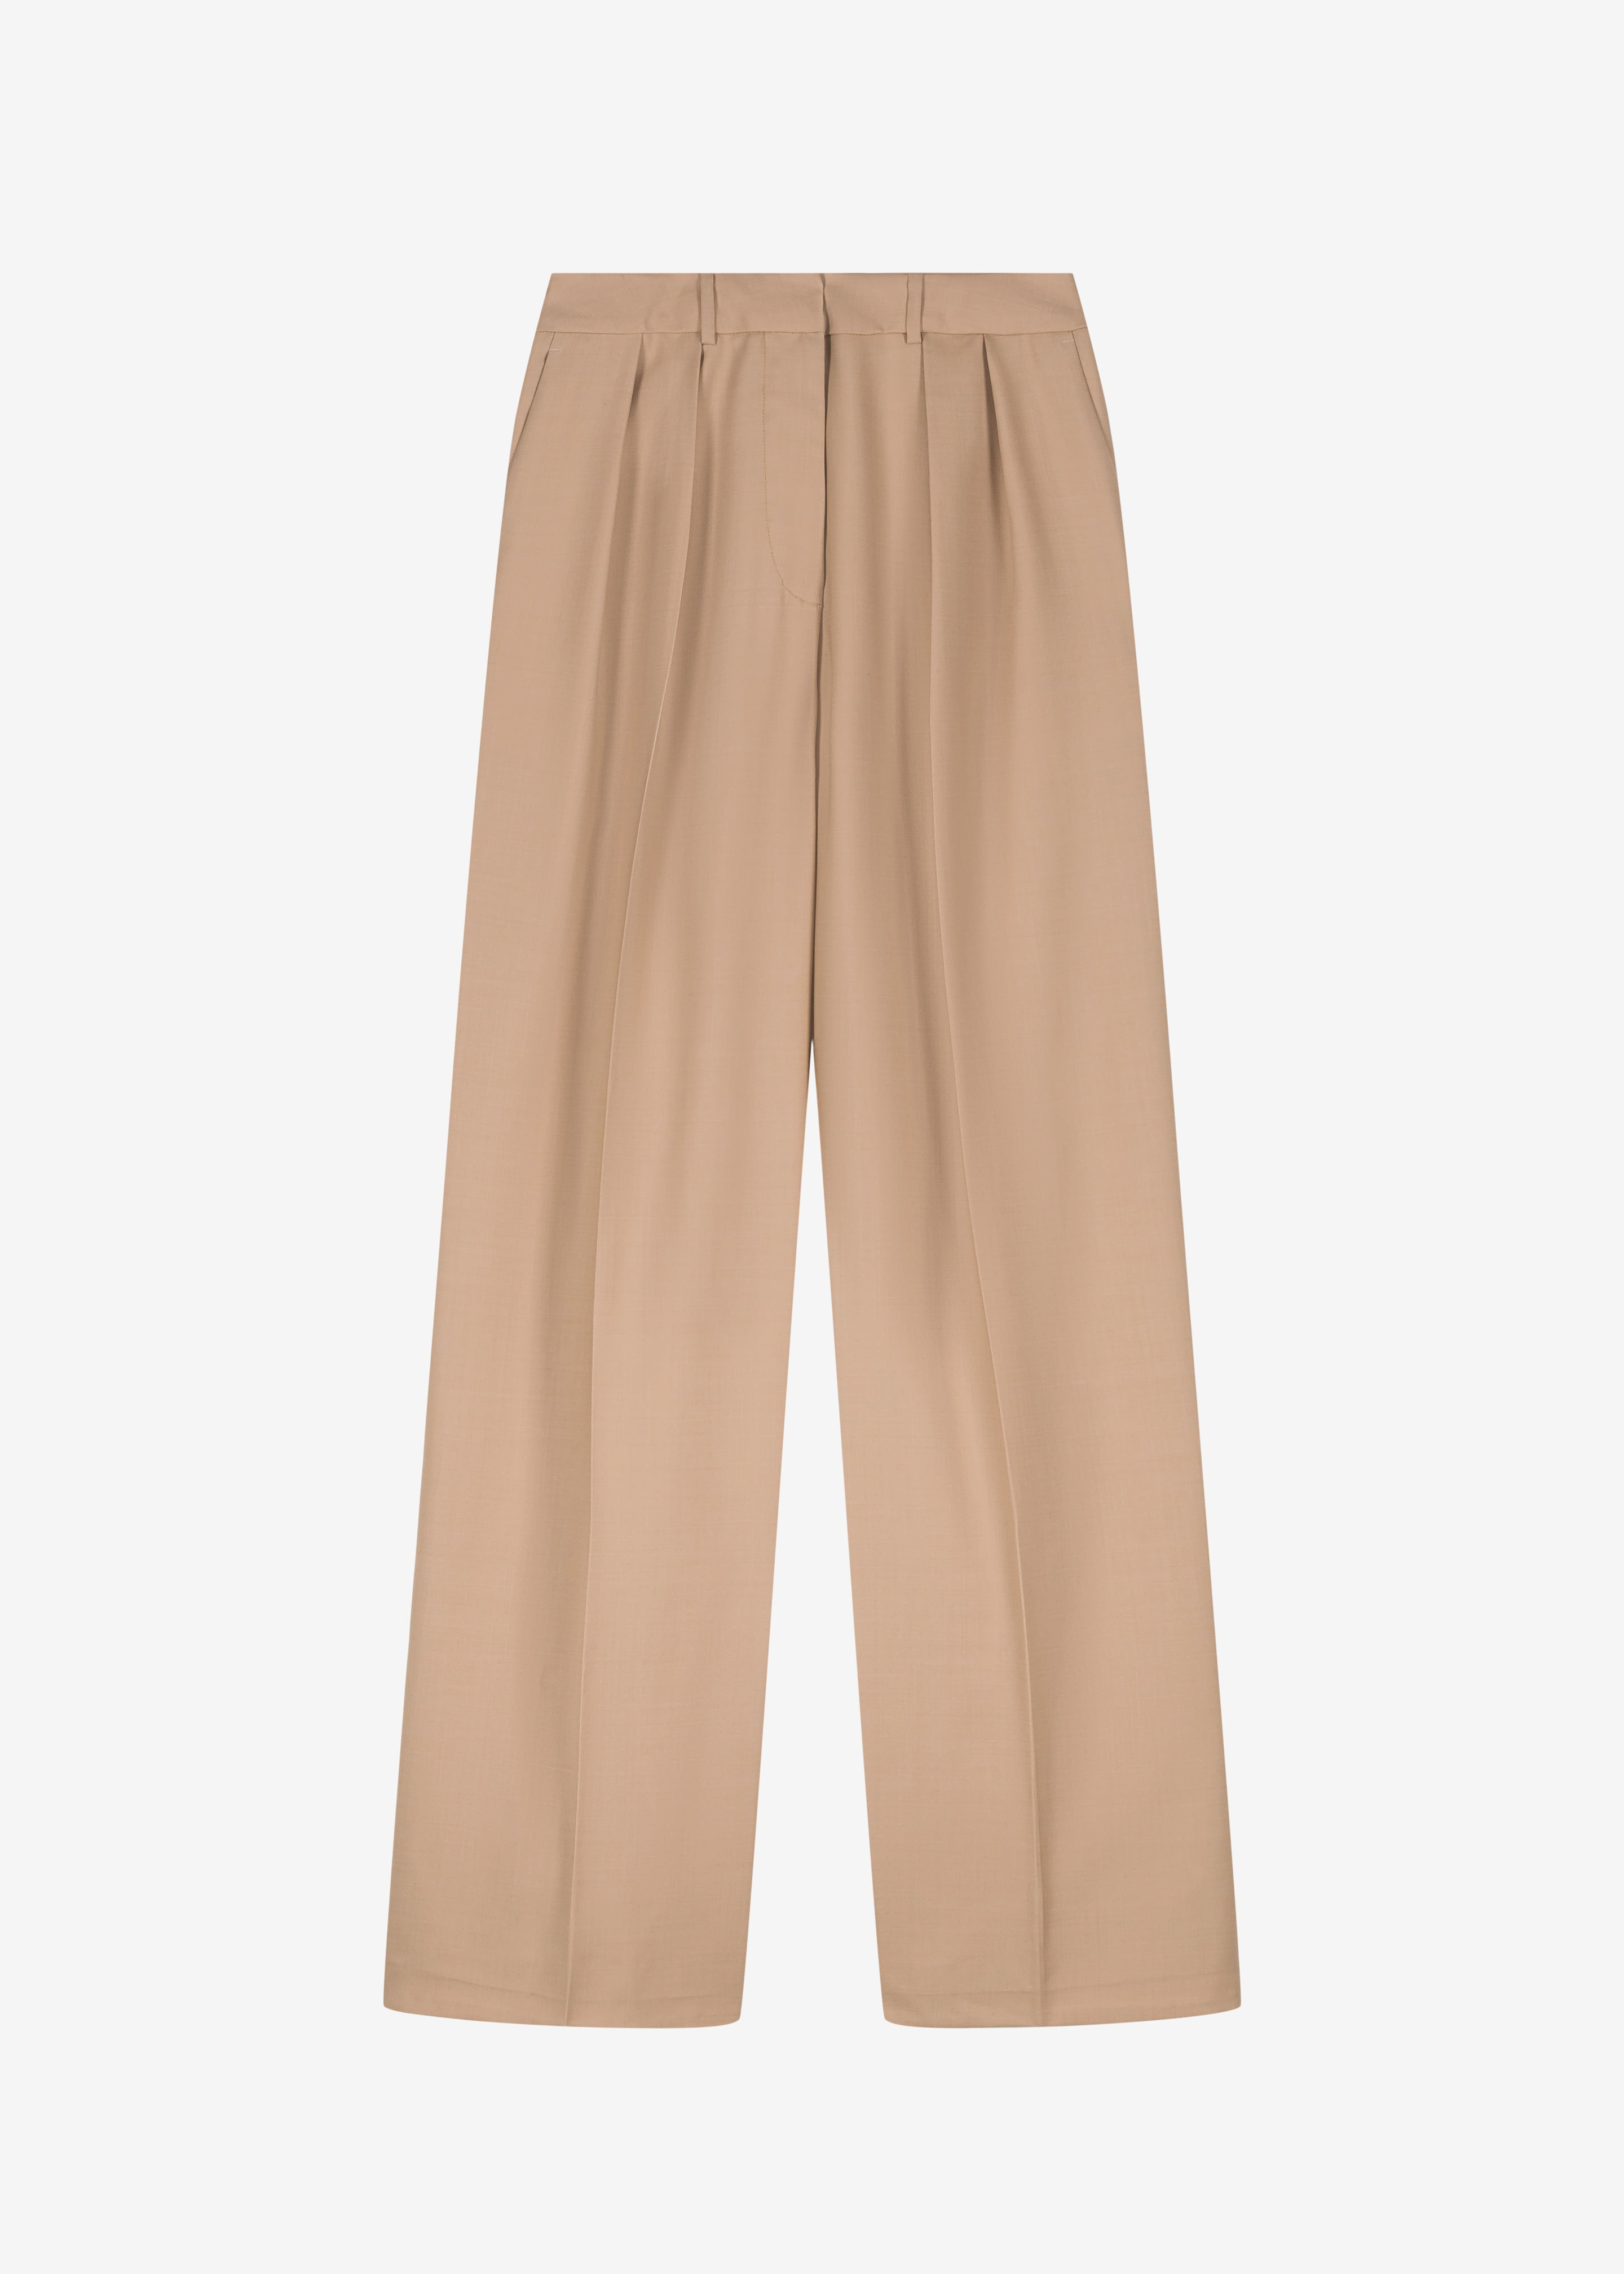 Tansy Pleated Twill Trousers - Camel - 7